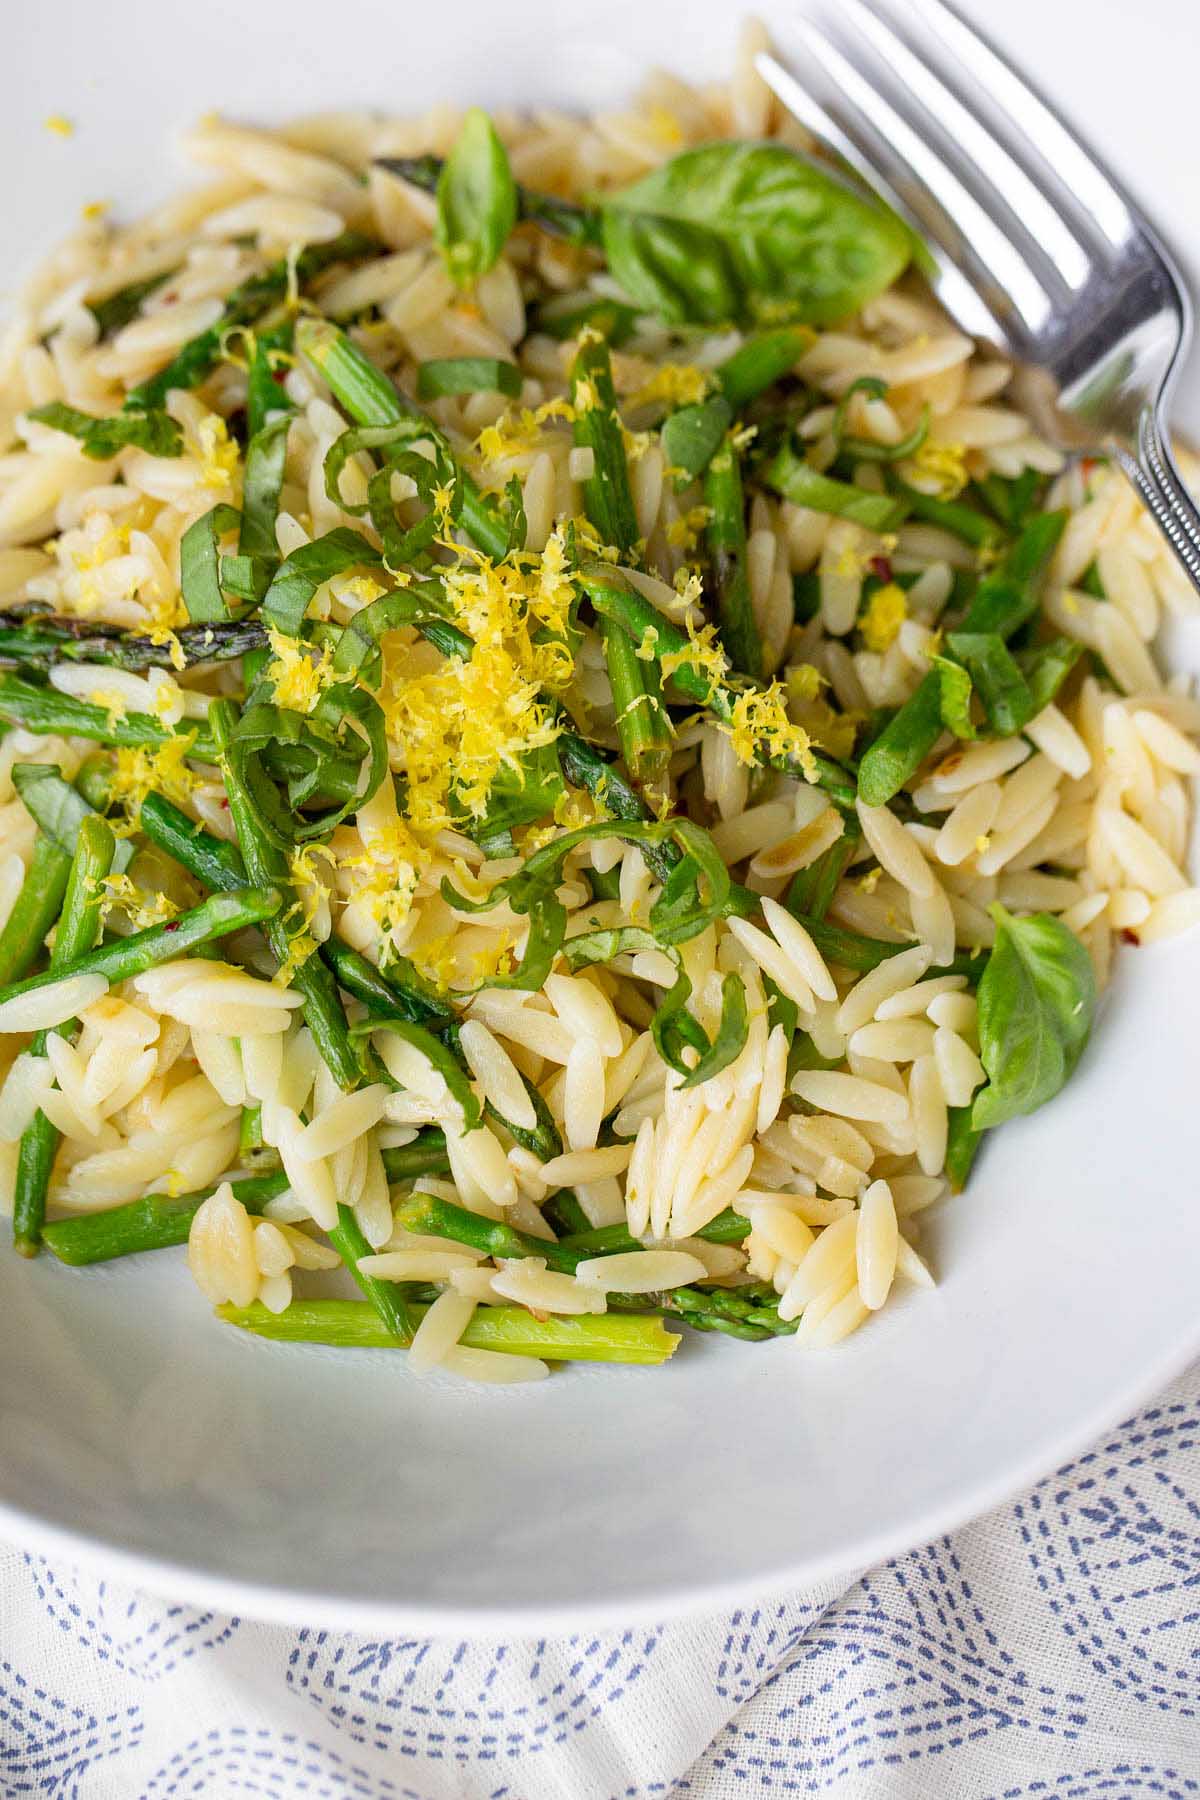 Asparagus and orzo in a bowl up close.